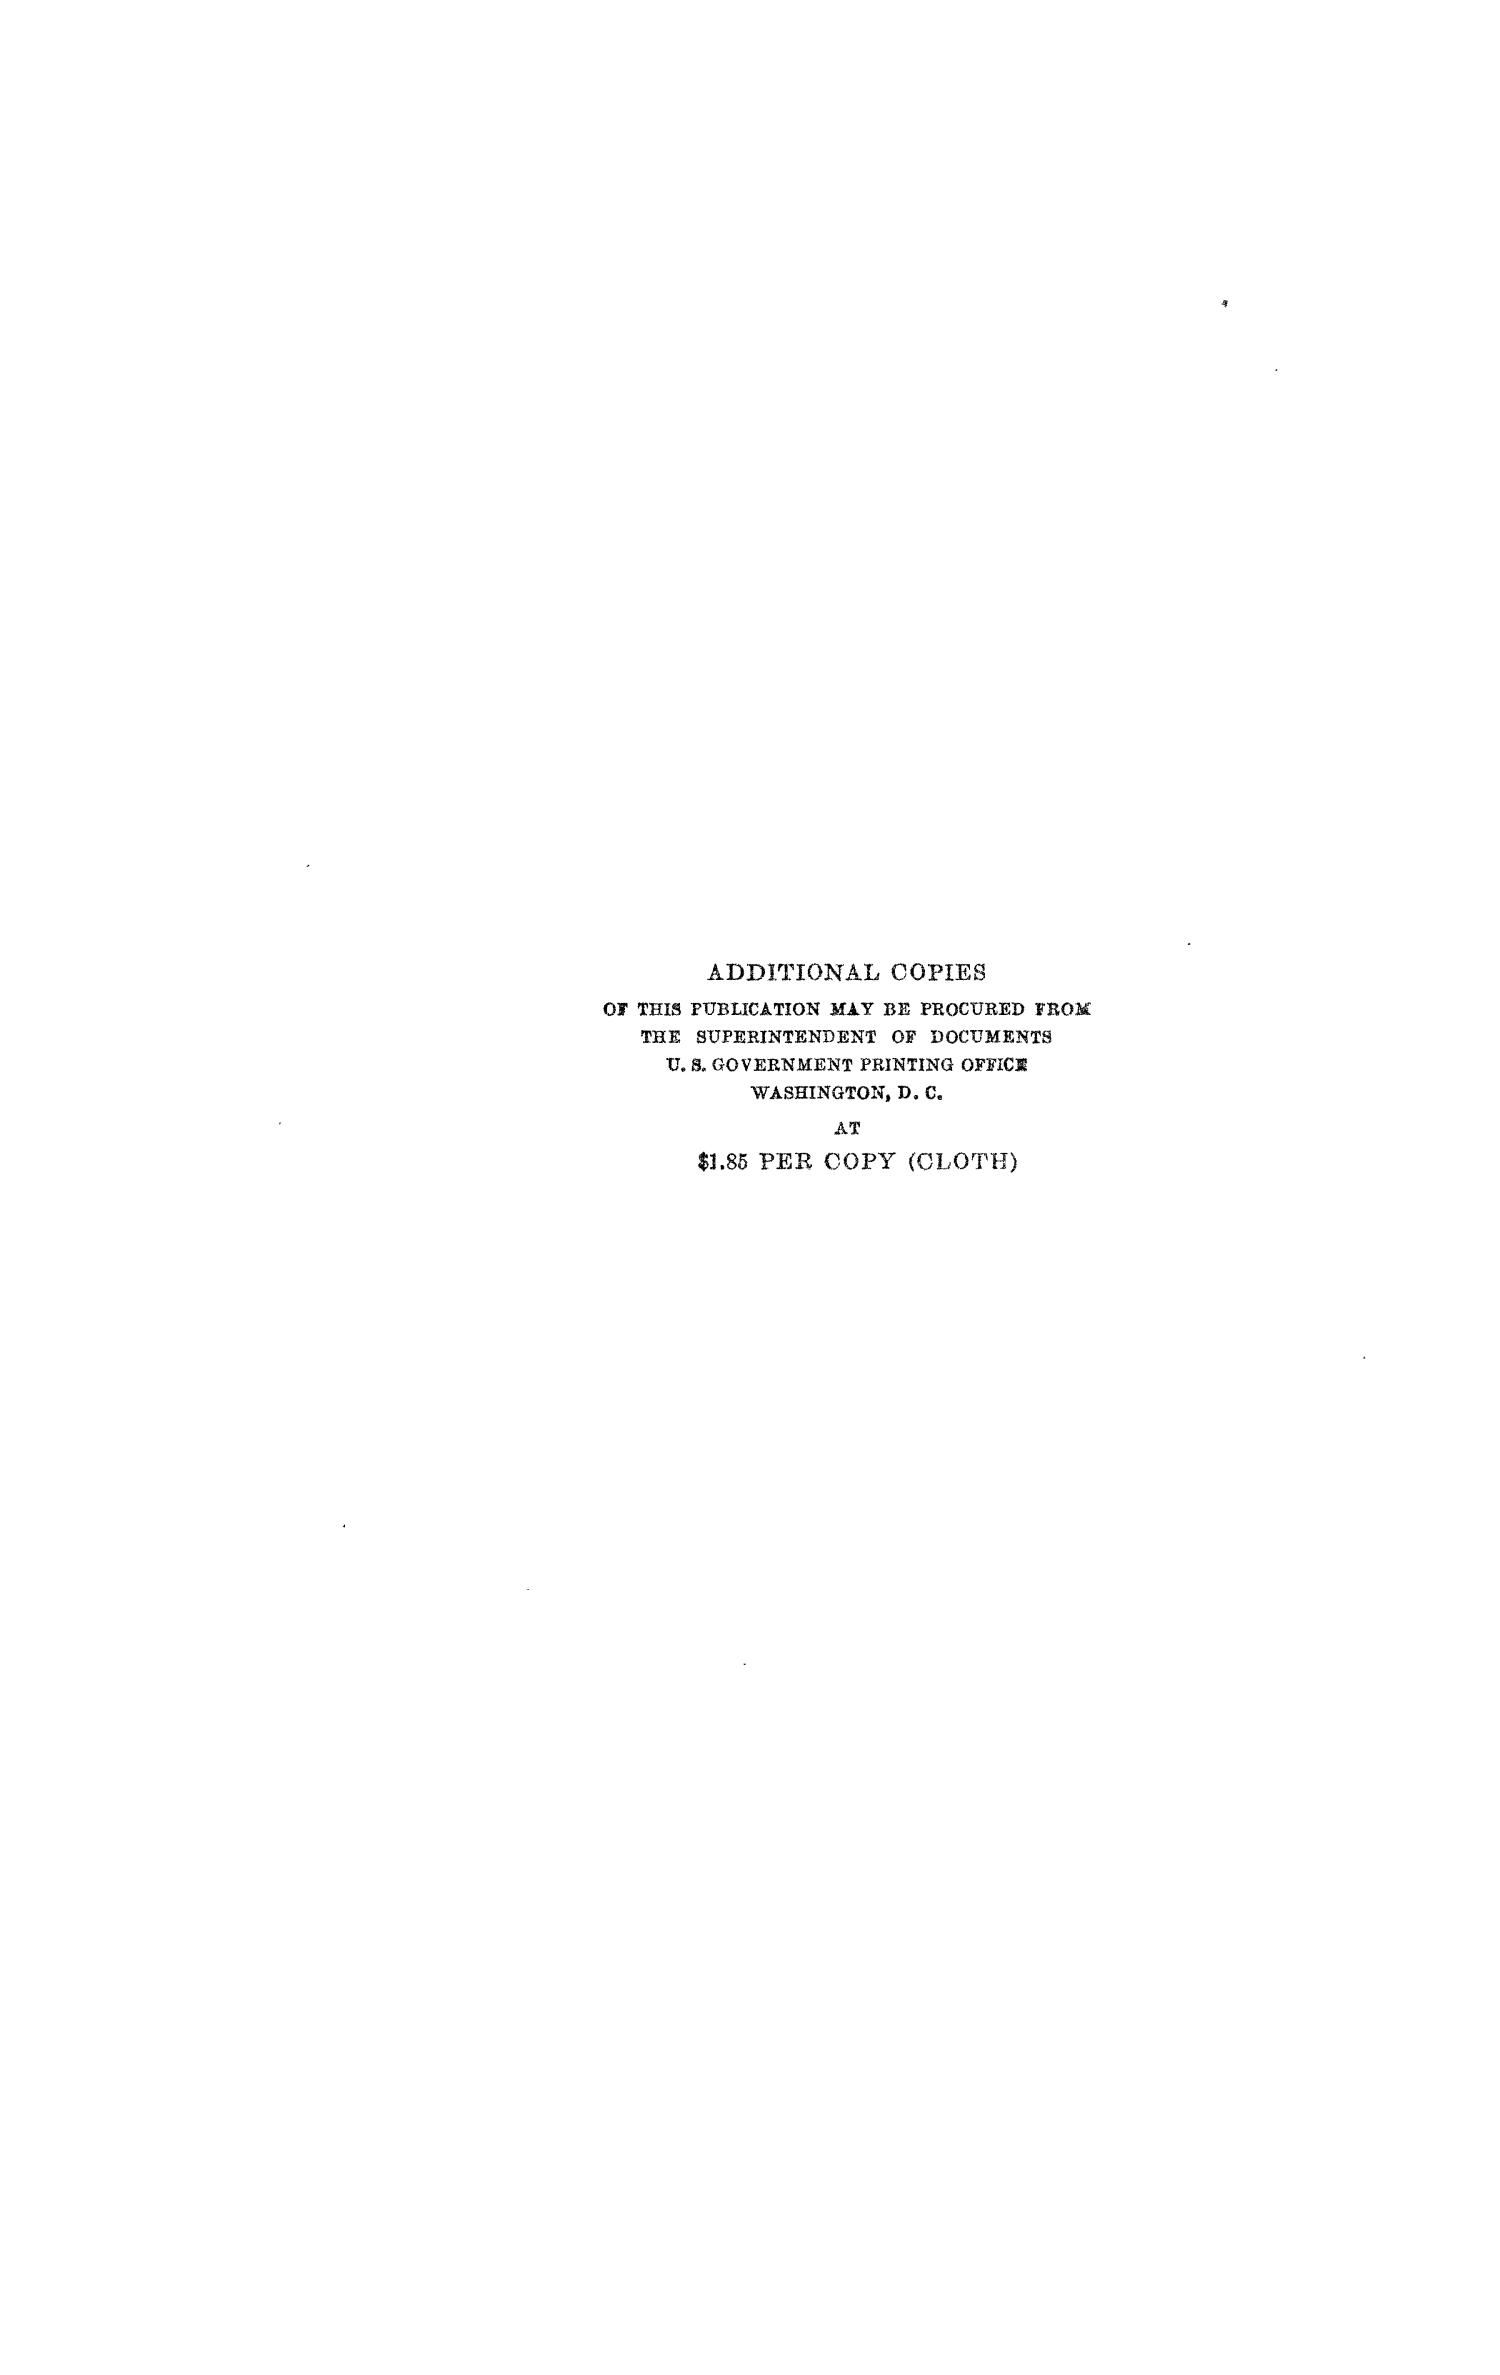 Annual Report of the American Historical Association for The Year 1922: In Two Volumes and a Supplemental Volume,  Volume 2
                                                
                                                    ii
                                                